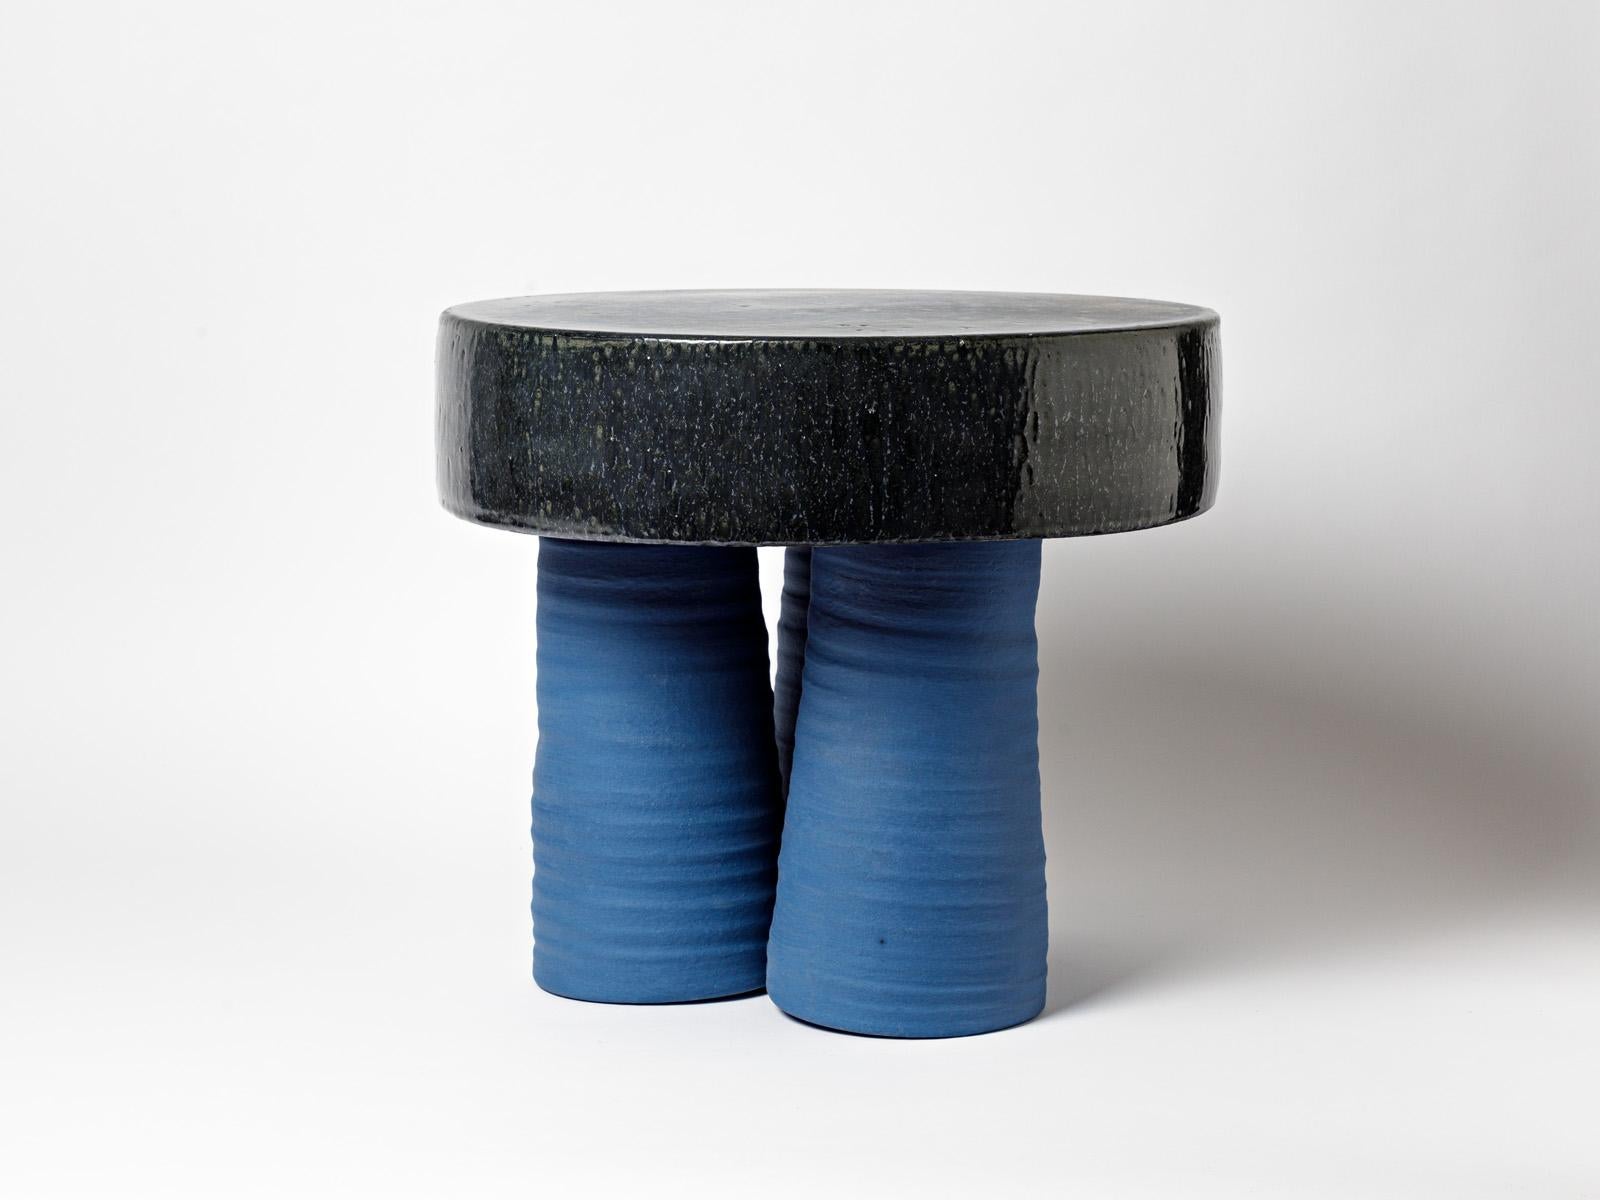 French Ceramic Stool or Table with Glazes Decoration by Mia Jensen, circa 2022